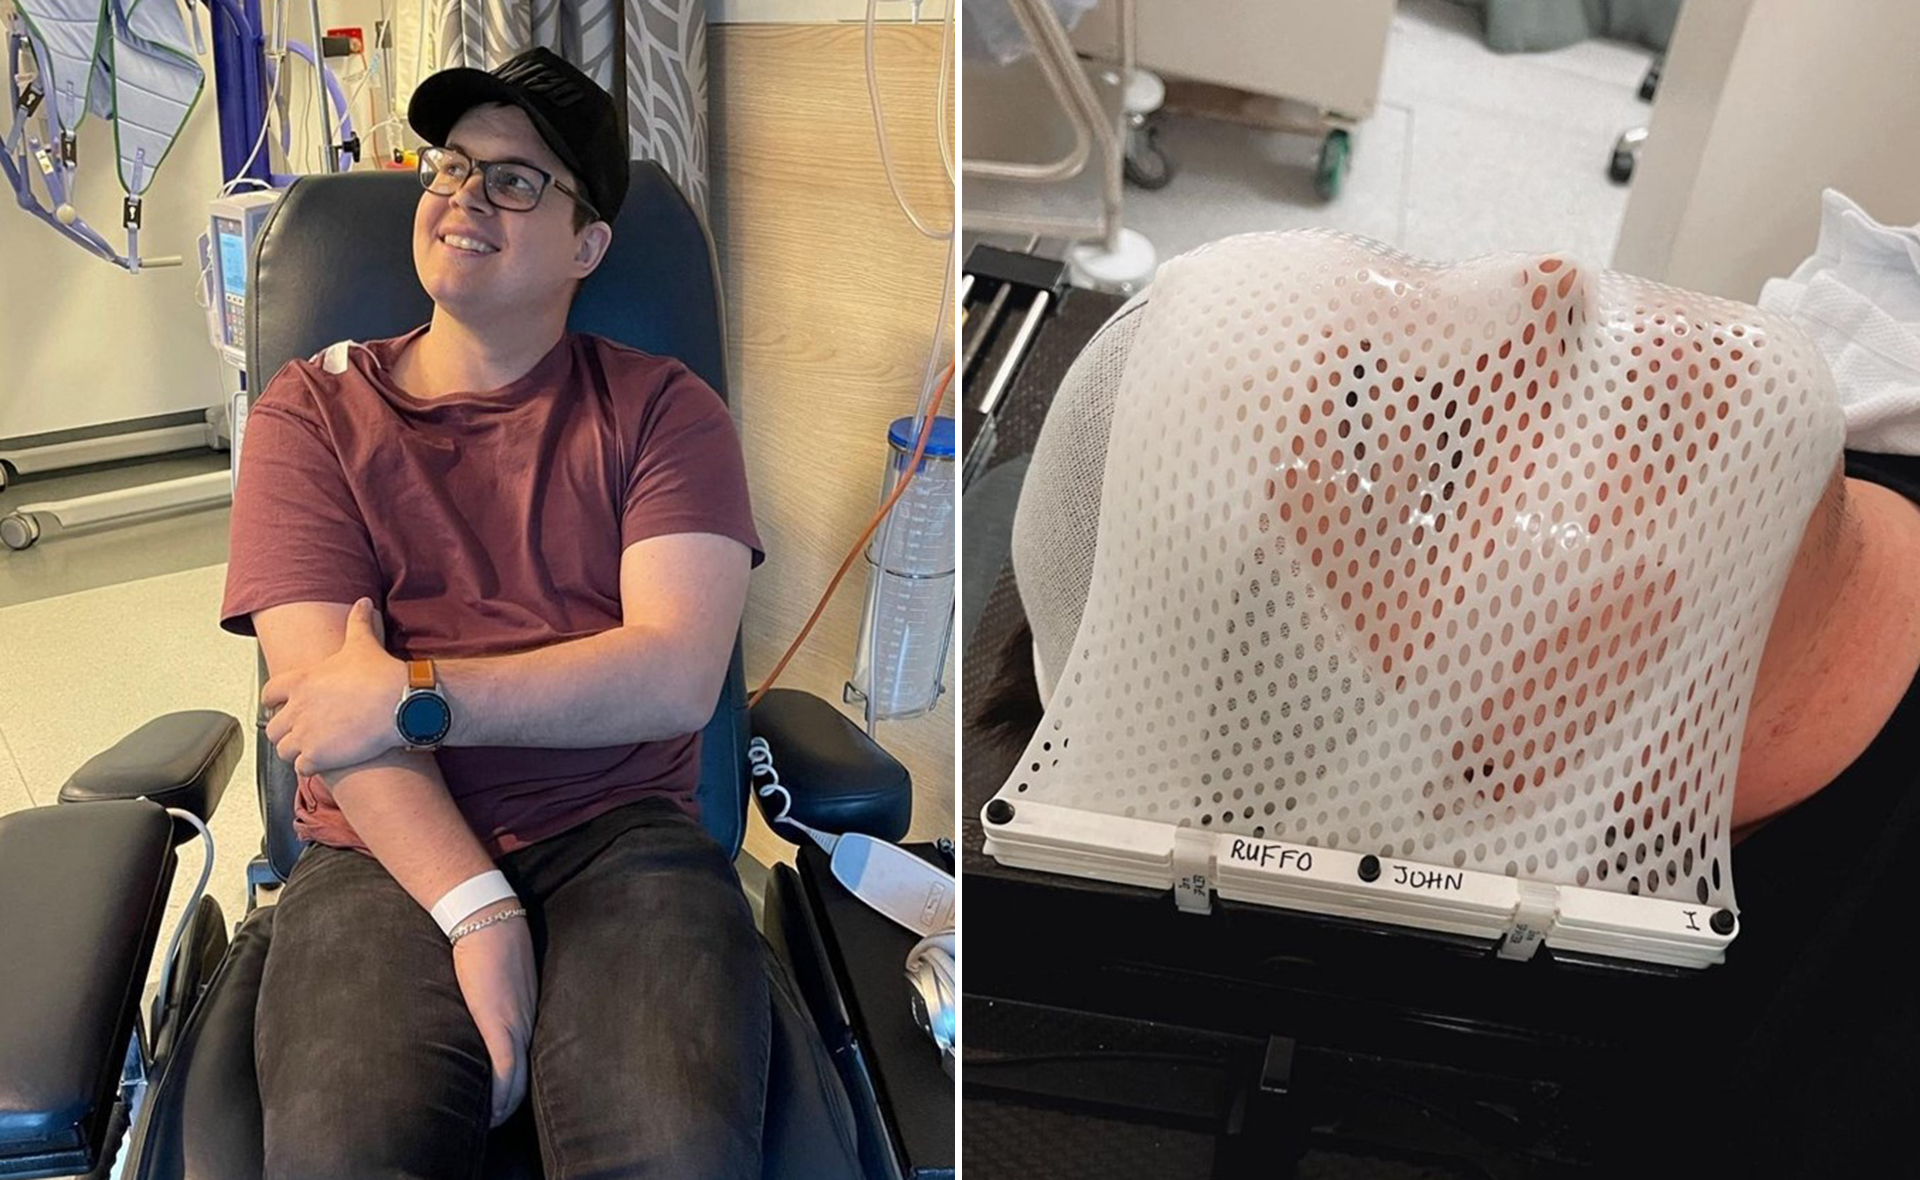 Former Home and Away star Johnny Ruffo shares cancer update as he undergoes radiation treatment: “Still fighting this!”